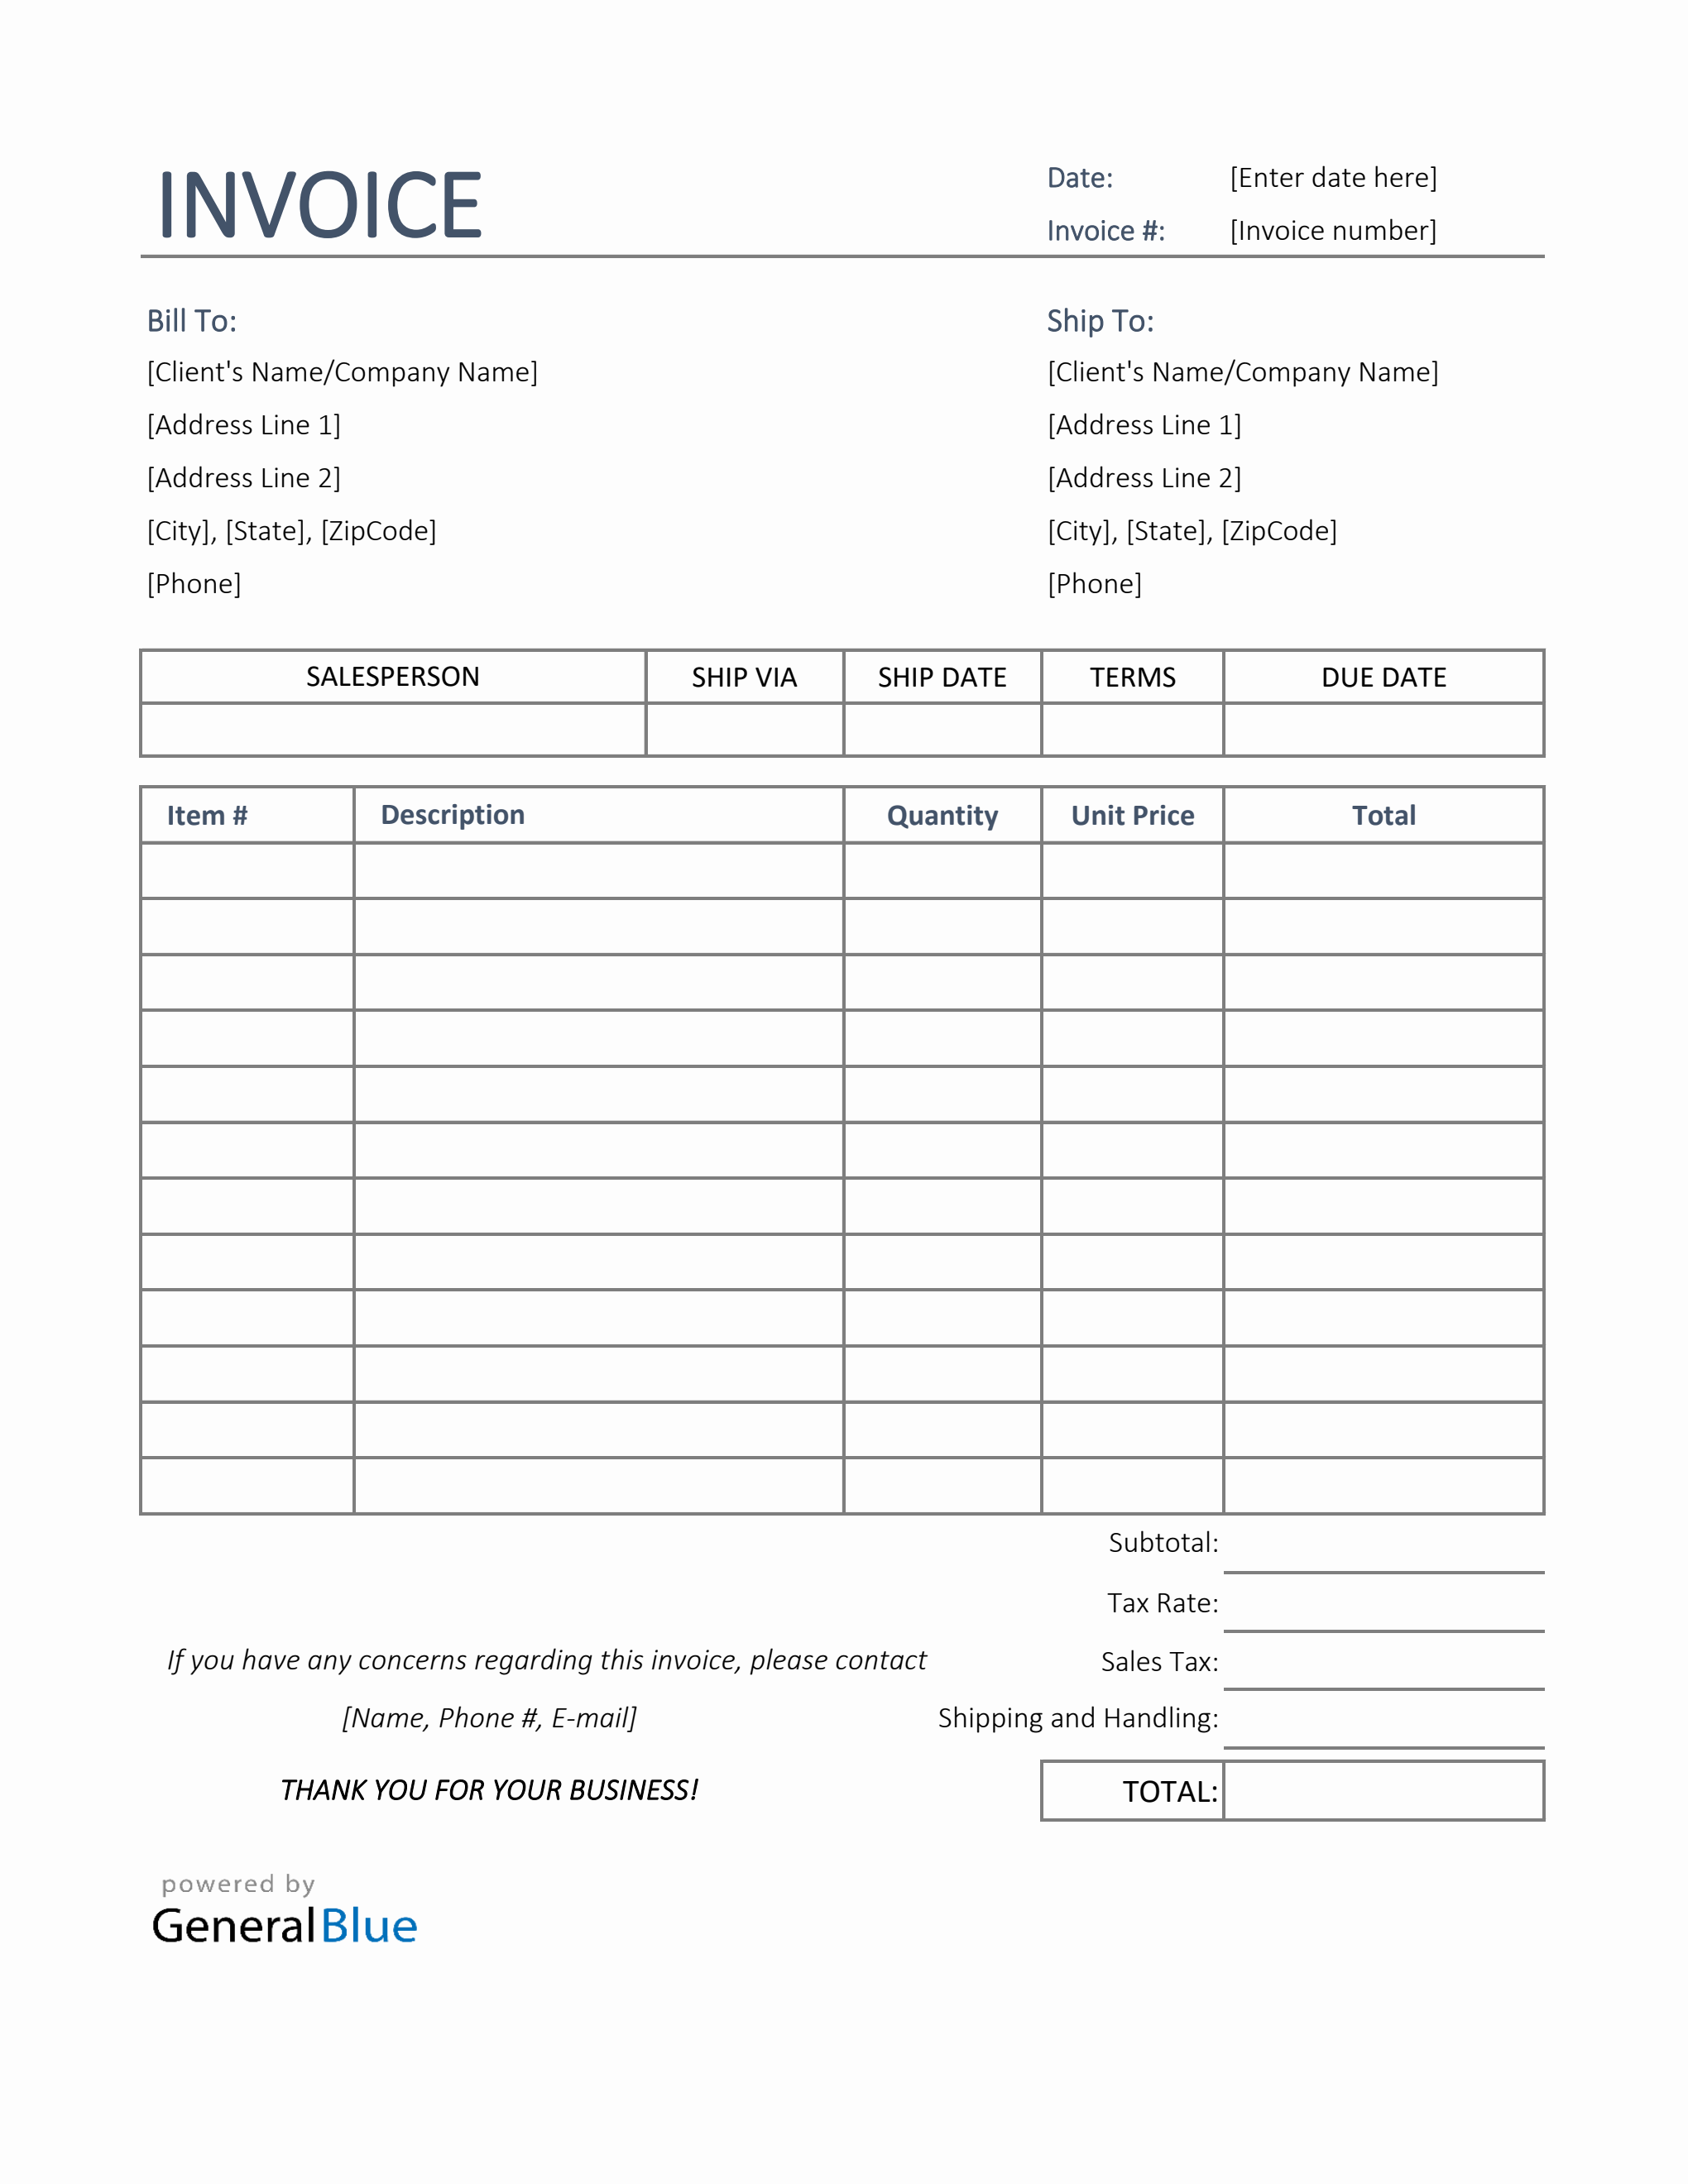 Sales Invoice Template in Excel (Simple) Intended For I Need An Invoice Template